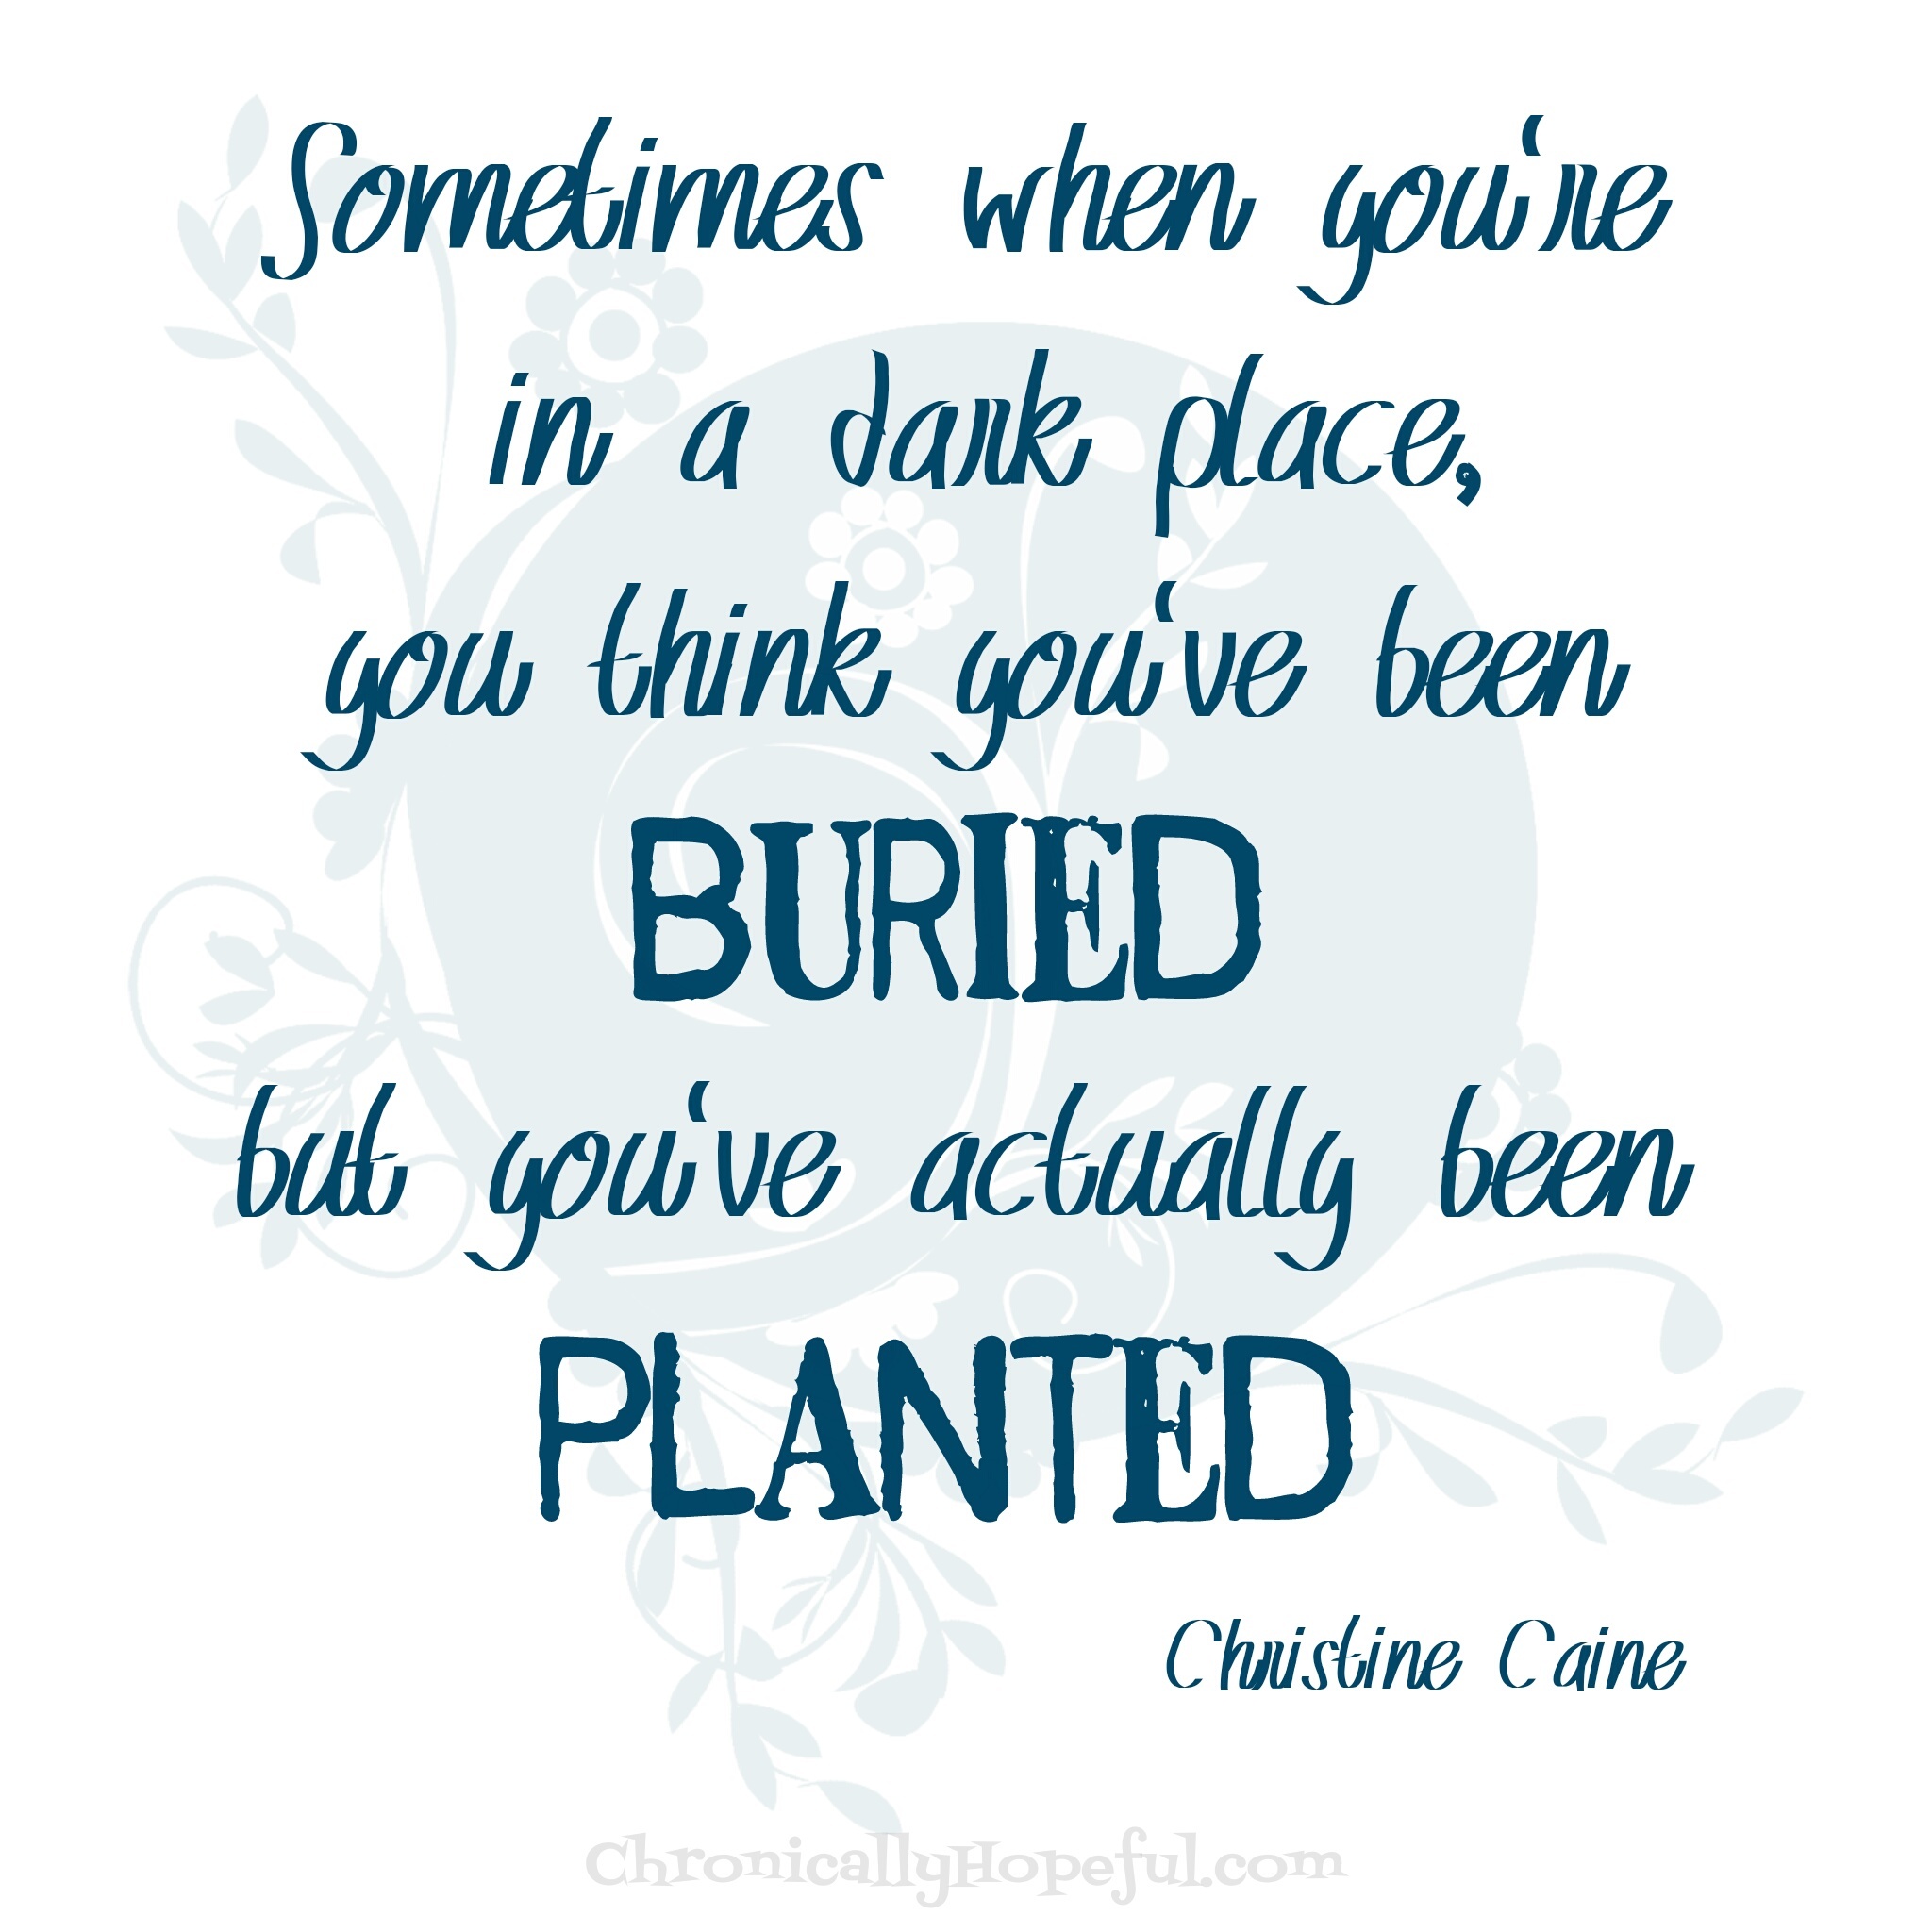 Not buried, but planted